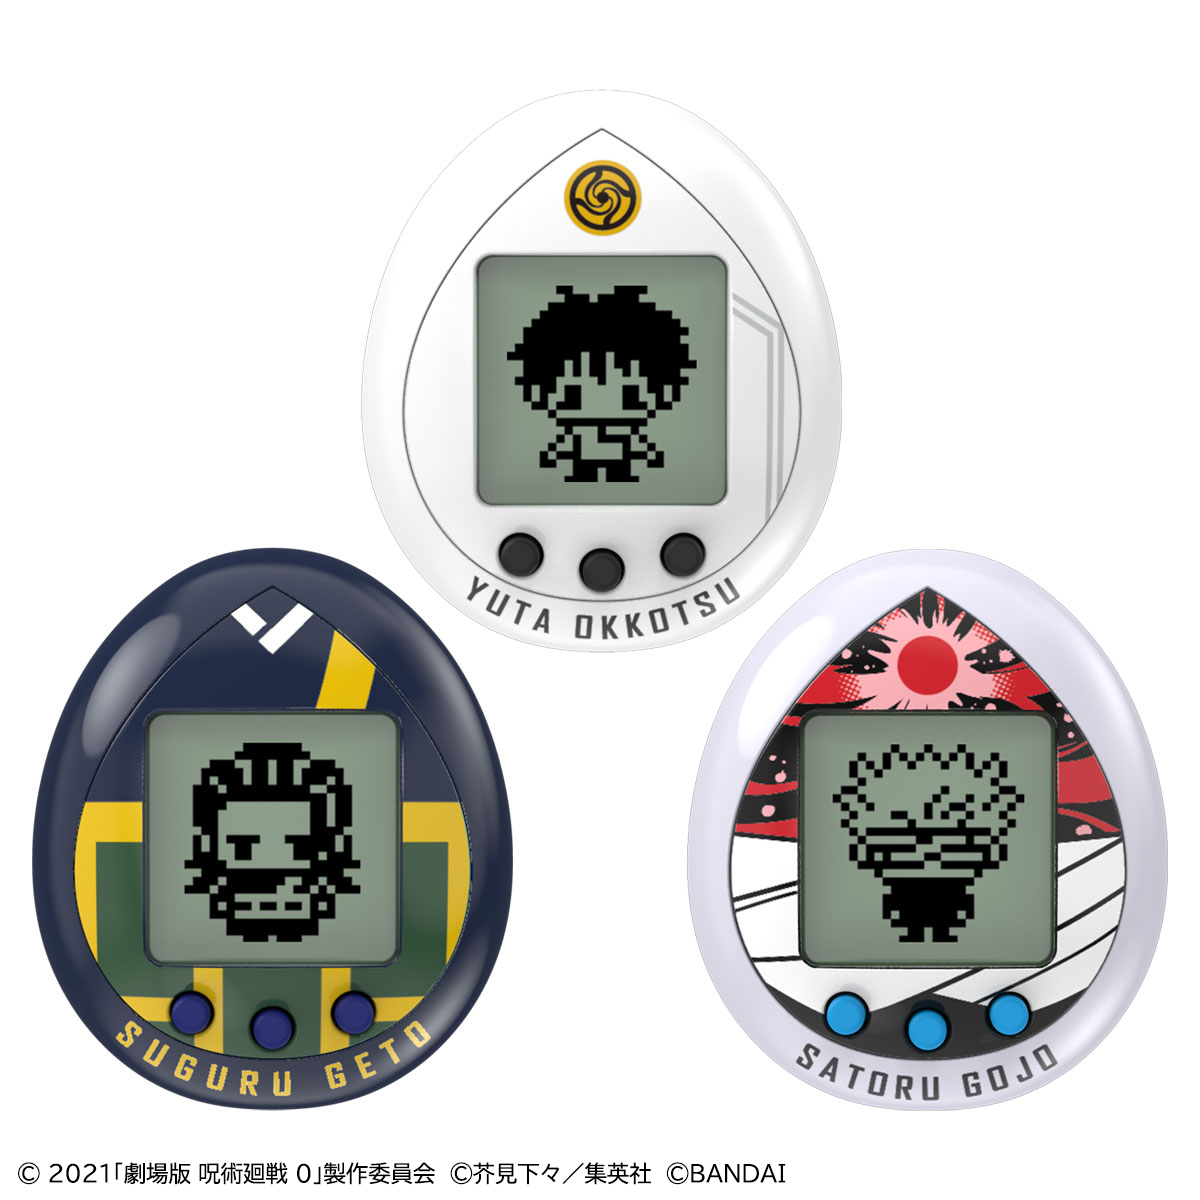 Star Wars X Tamagotchi” Let's rear “R2-D2”! C-3PO and Yoda will also appear  | Anime Anime Global